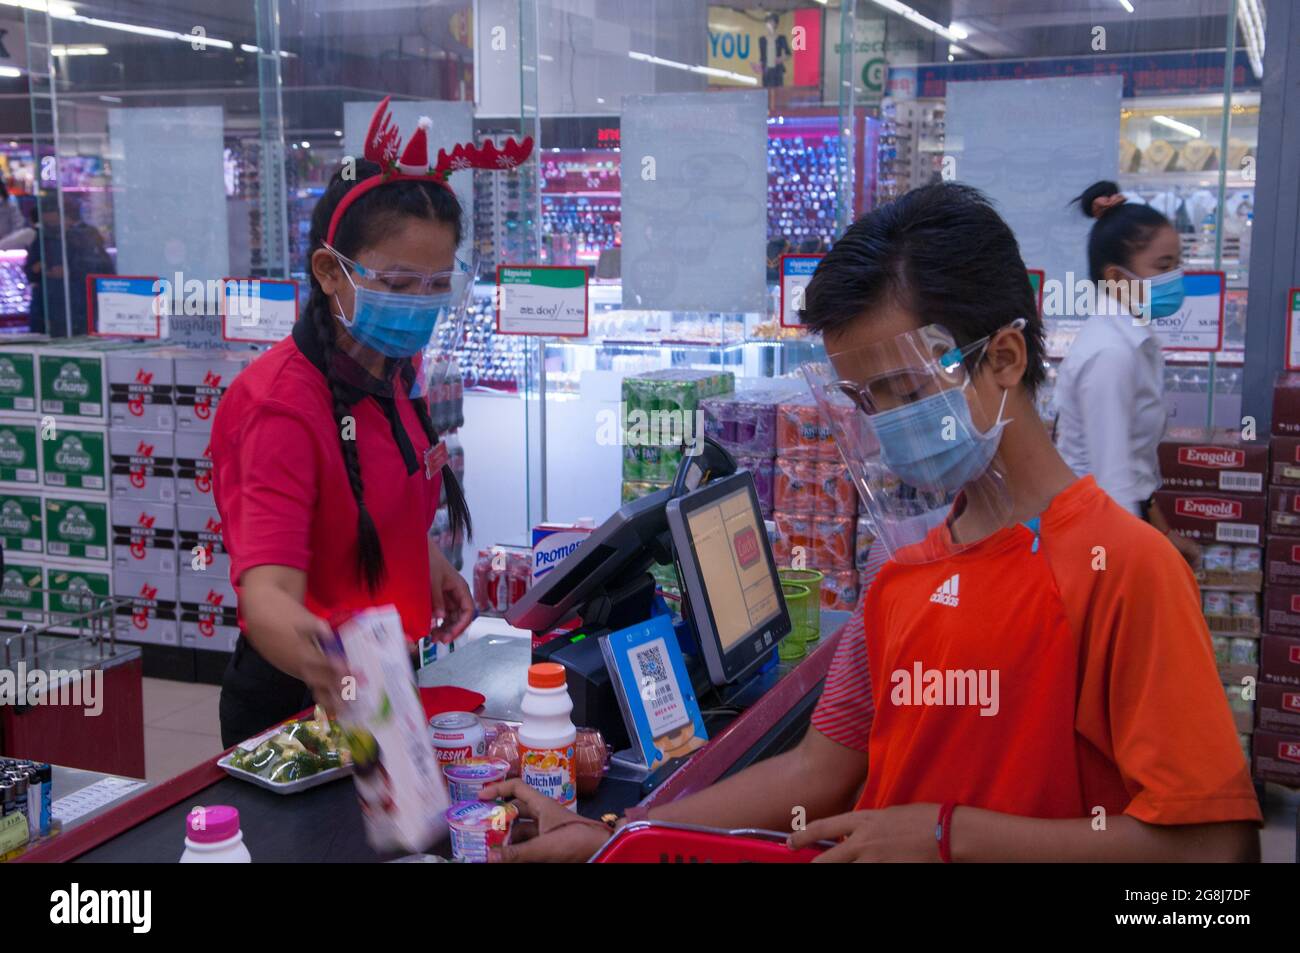 during the Christmas holidays with an outbreak of COVID - 19, a Cambodian female cashier, wearing a protective plastic face shield & mask, scans groceries at a grocery store checkout counter during the coronavirus pandemic. a mixed race teenage boy (Cambodian - American) loads his groceries onto the counter. Steung Meanchey, Phnom Penh, Cambodia. Dec. 23rd, 2020. © Kraig Lieb Stock Photo